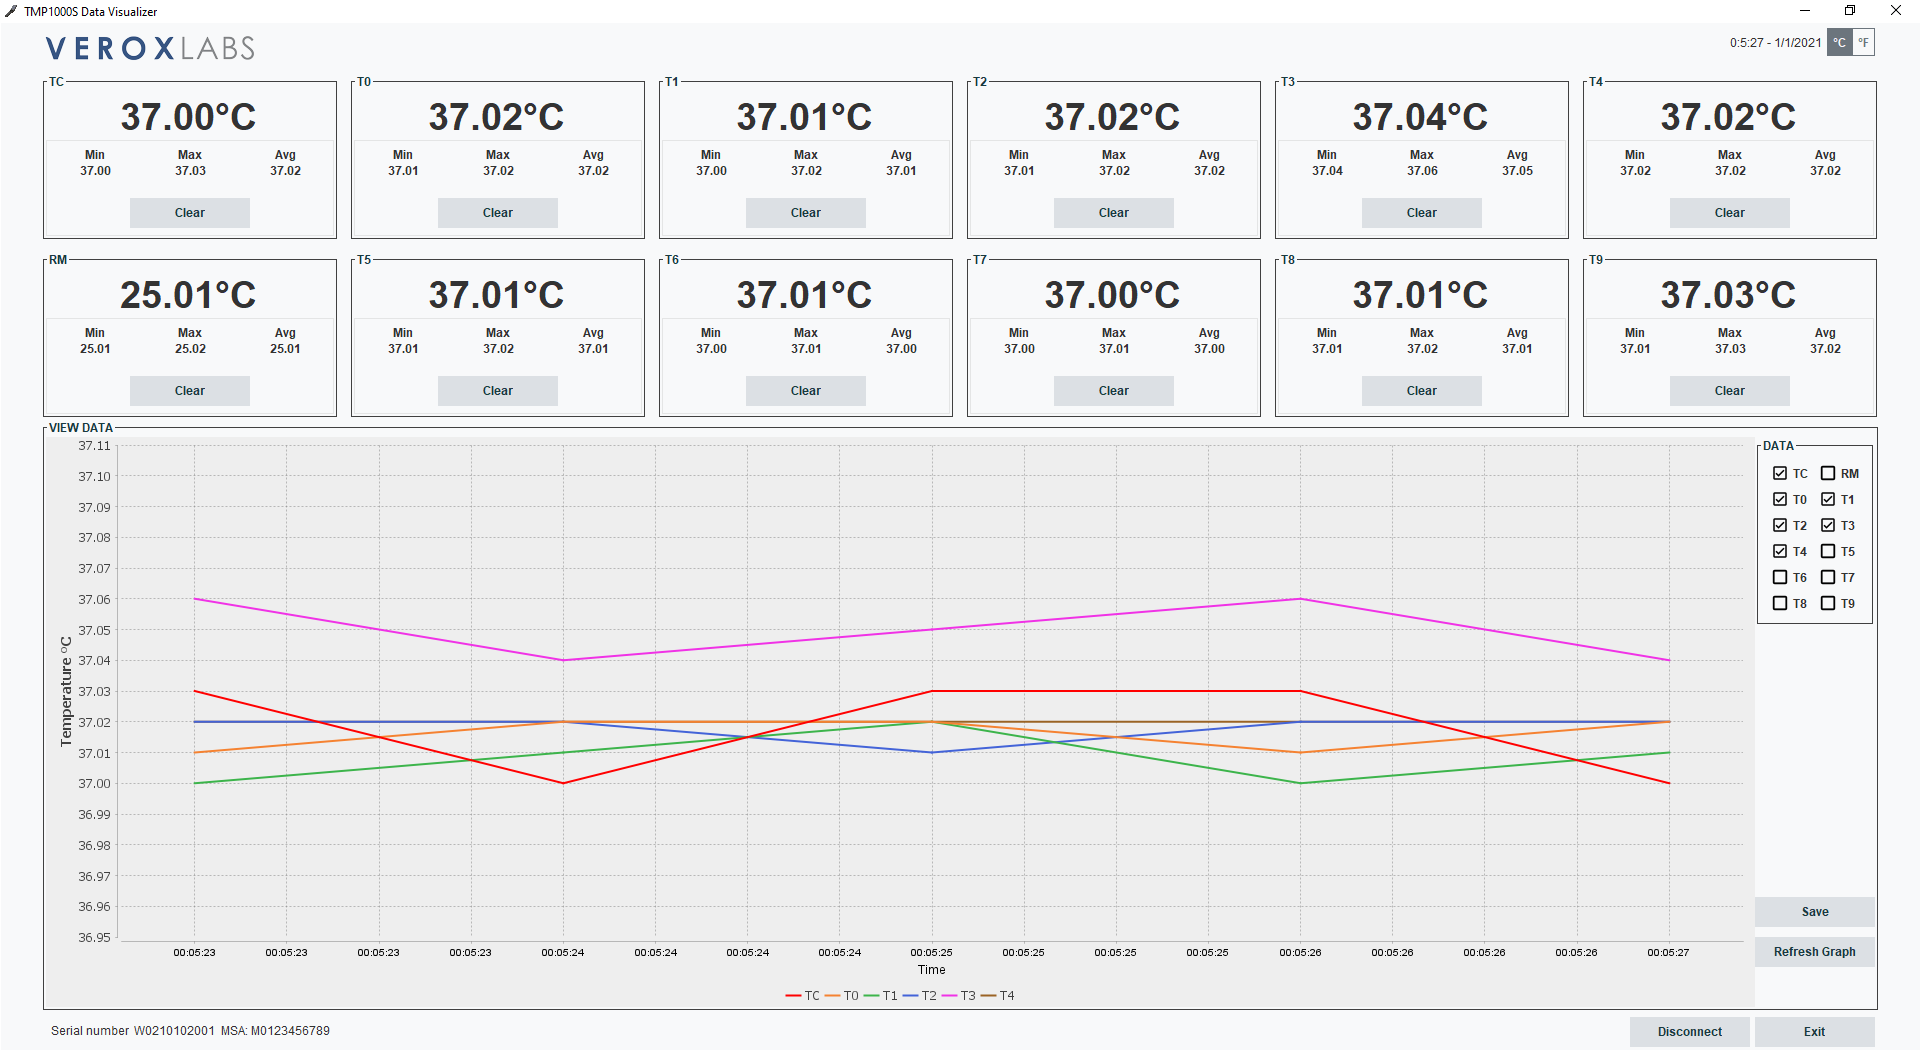 PC Software screenshot with 12 Temperature display sections with Min, Max, Avg values and Plots with time axis and temperature